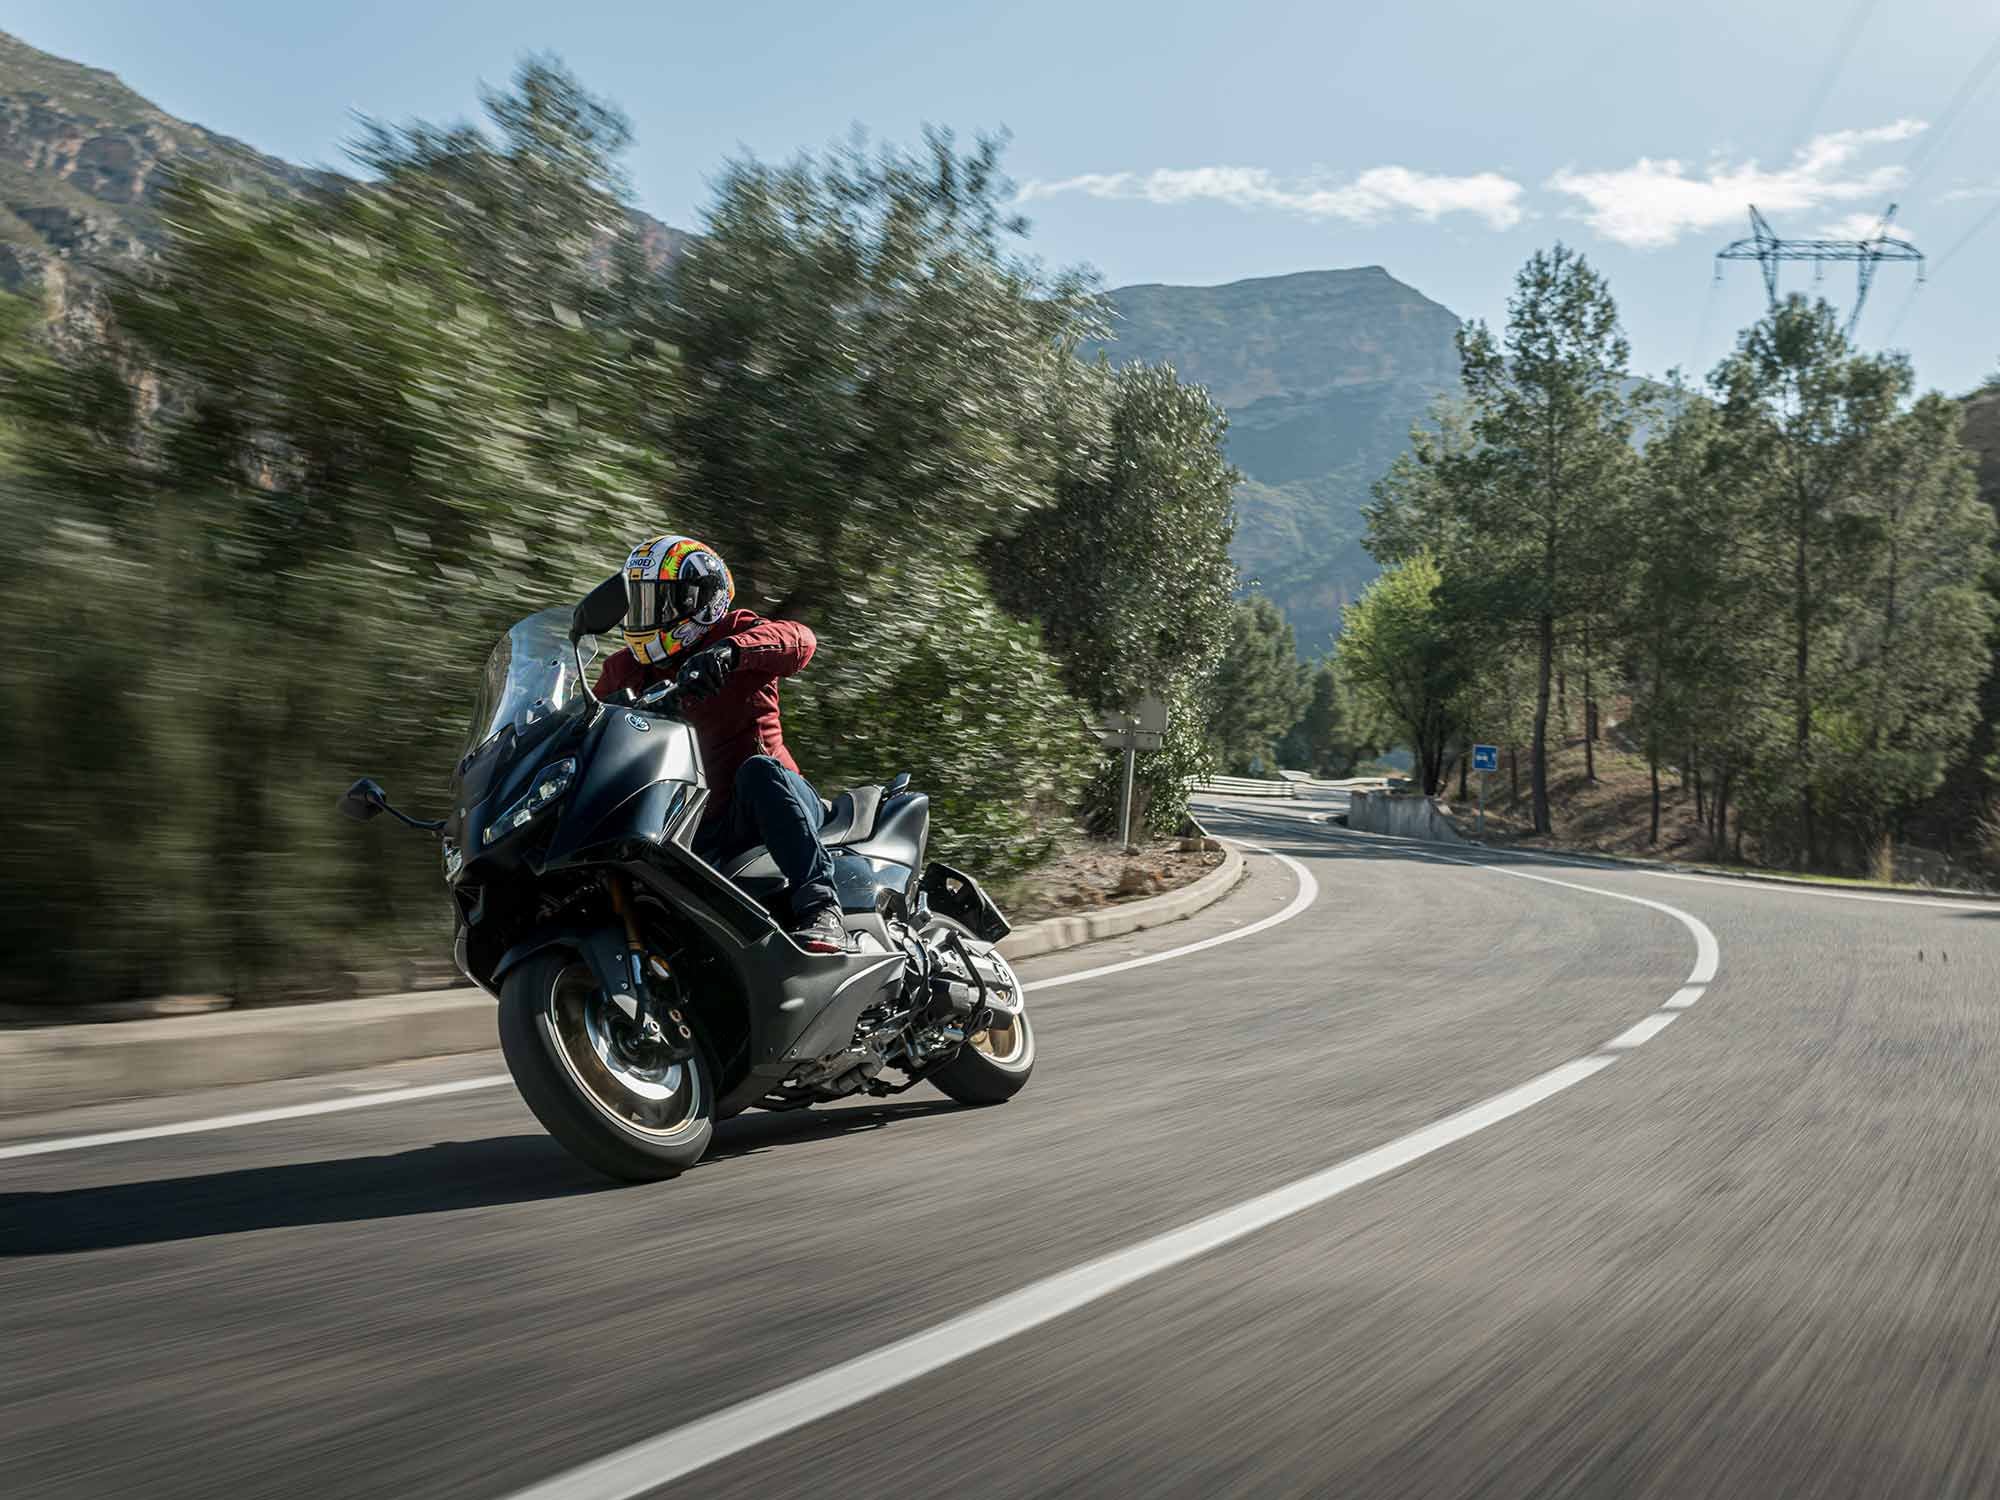 There’s a reason the TMAX is so popular in Europe: It fills the commuter role comfortably while delivering sporty performance.